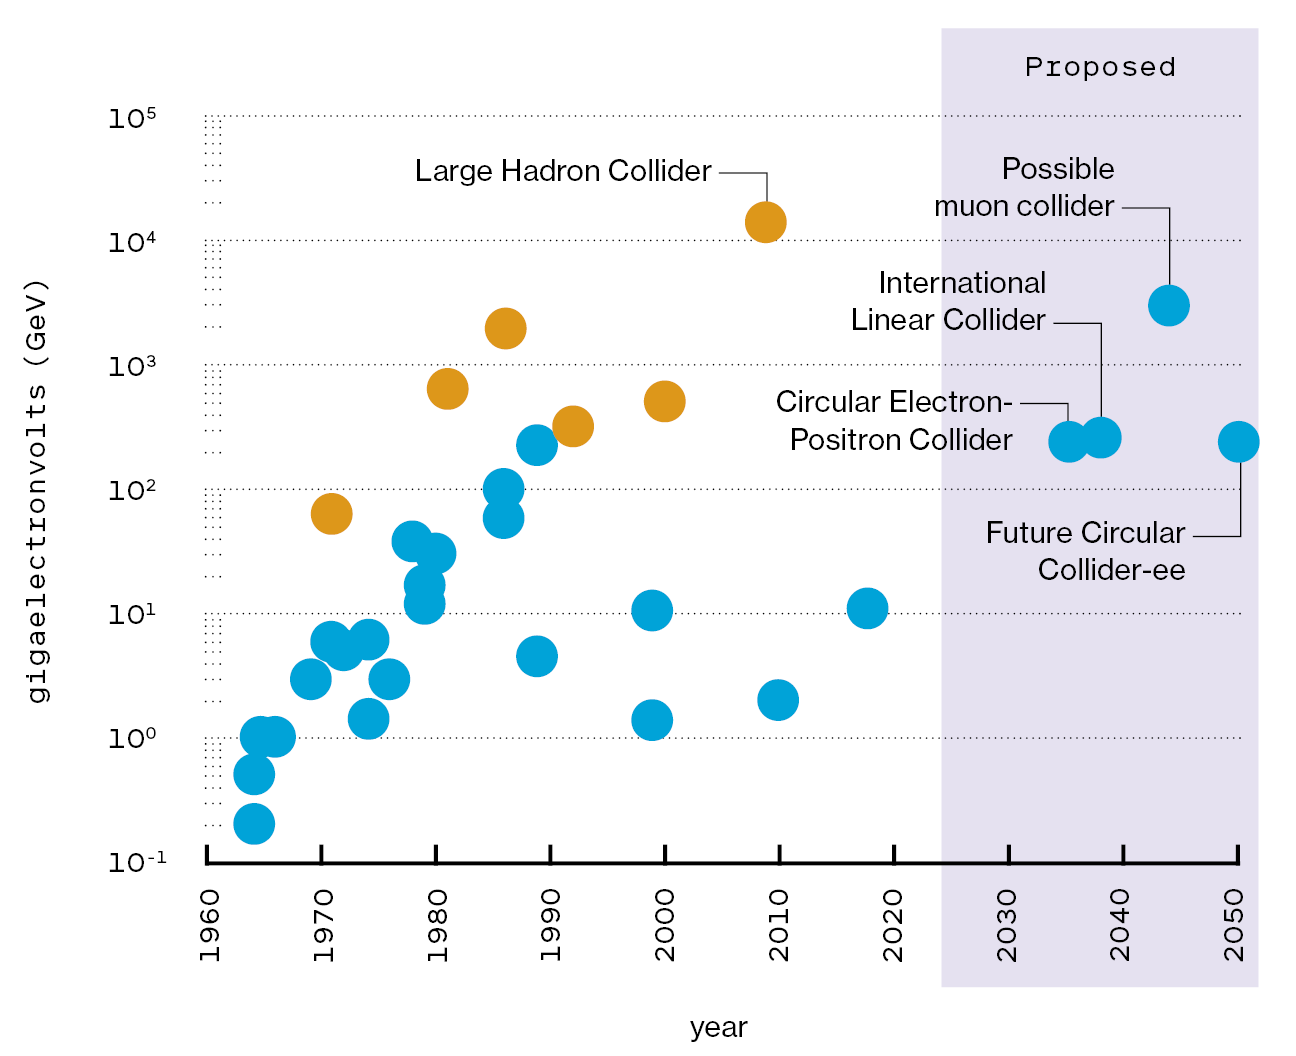 A bubble chart showing the GeV of 32 colliders from 1960 to proposed colliders in 2050.